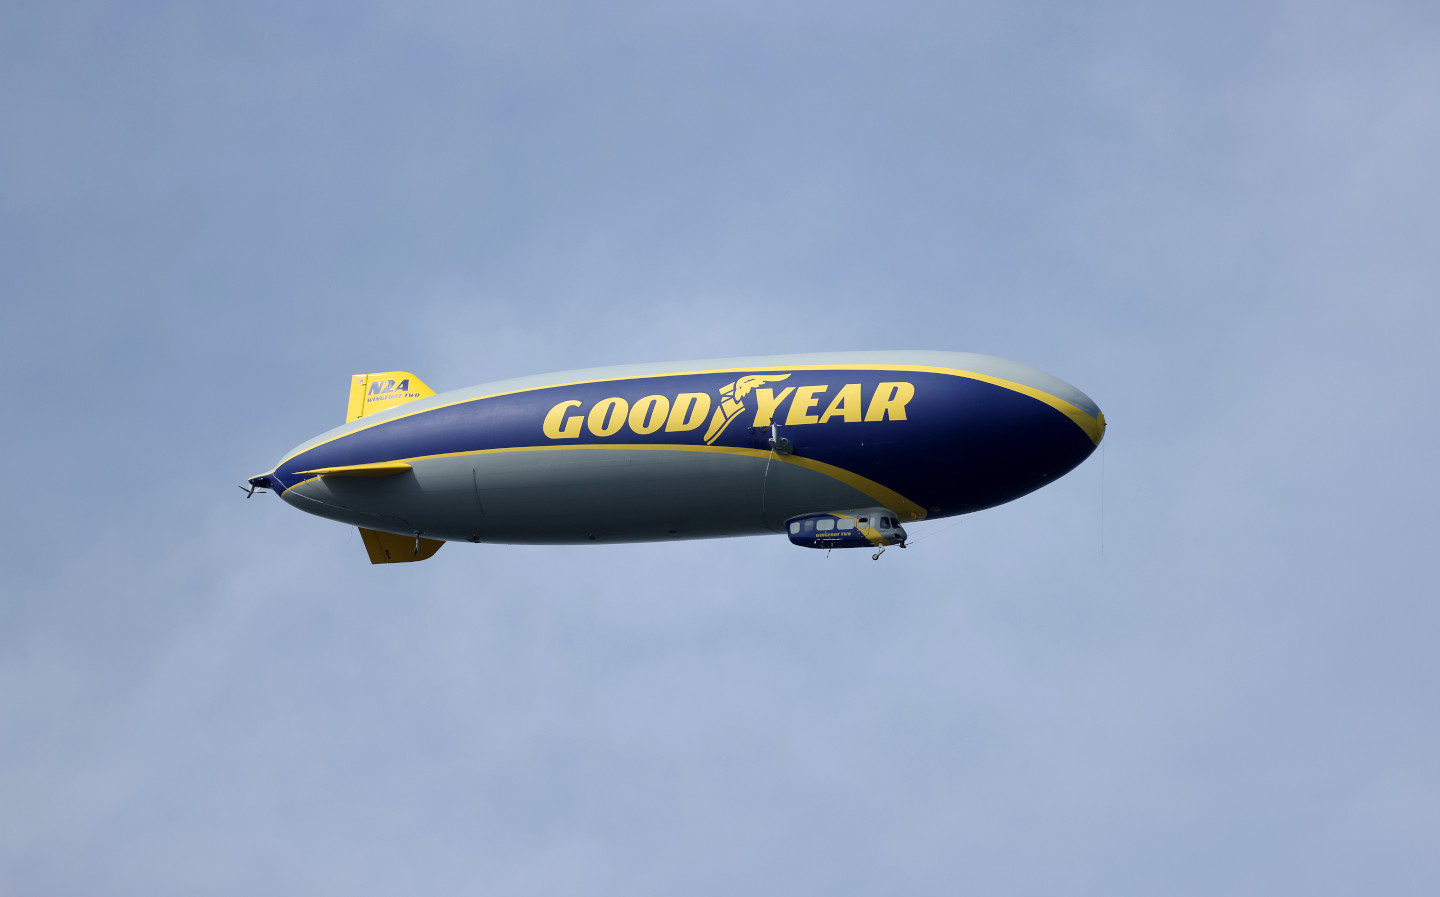 You know it's race weekend when the blimp is in town! : r/NASCAR